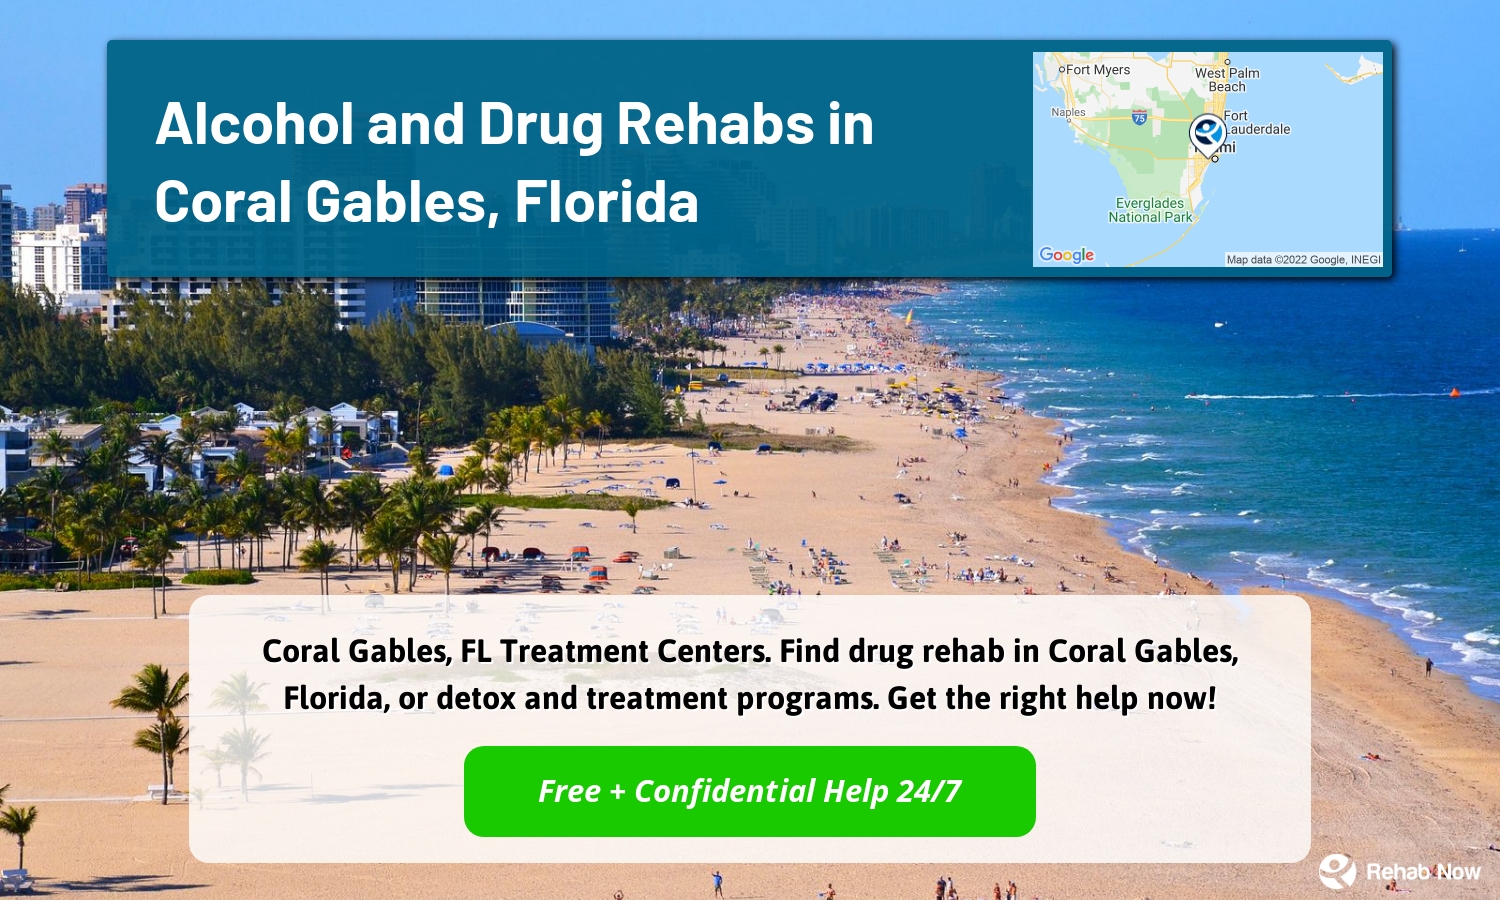 Coral Gables, FL Treatment Centers. Find drug rehab in Coral Gables, Florida, or detox and treatment programs. Get the right help now!